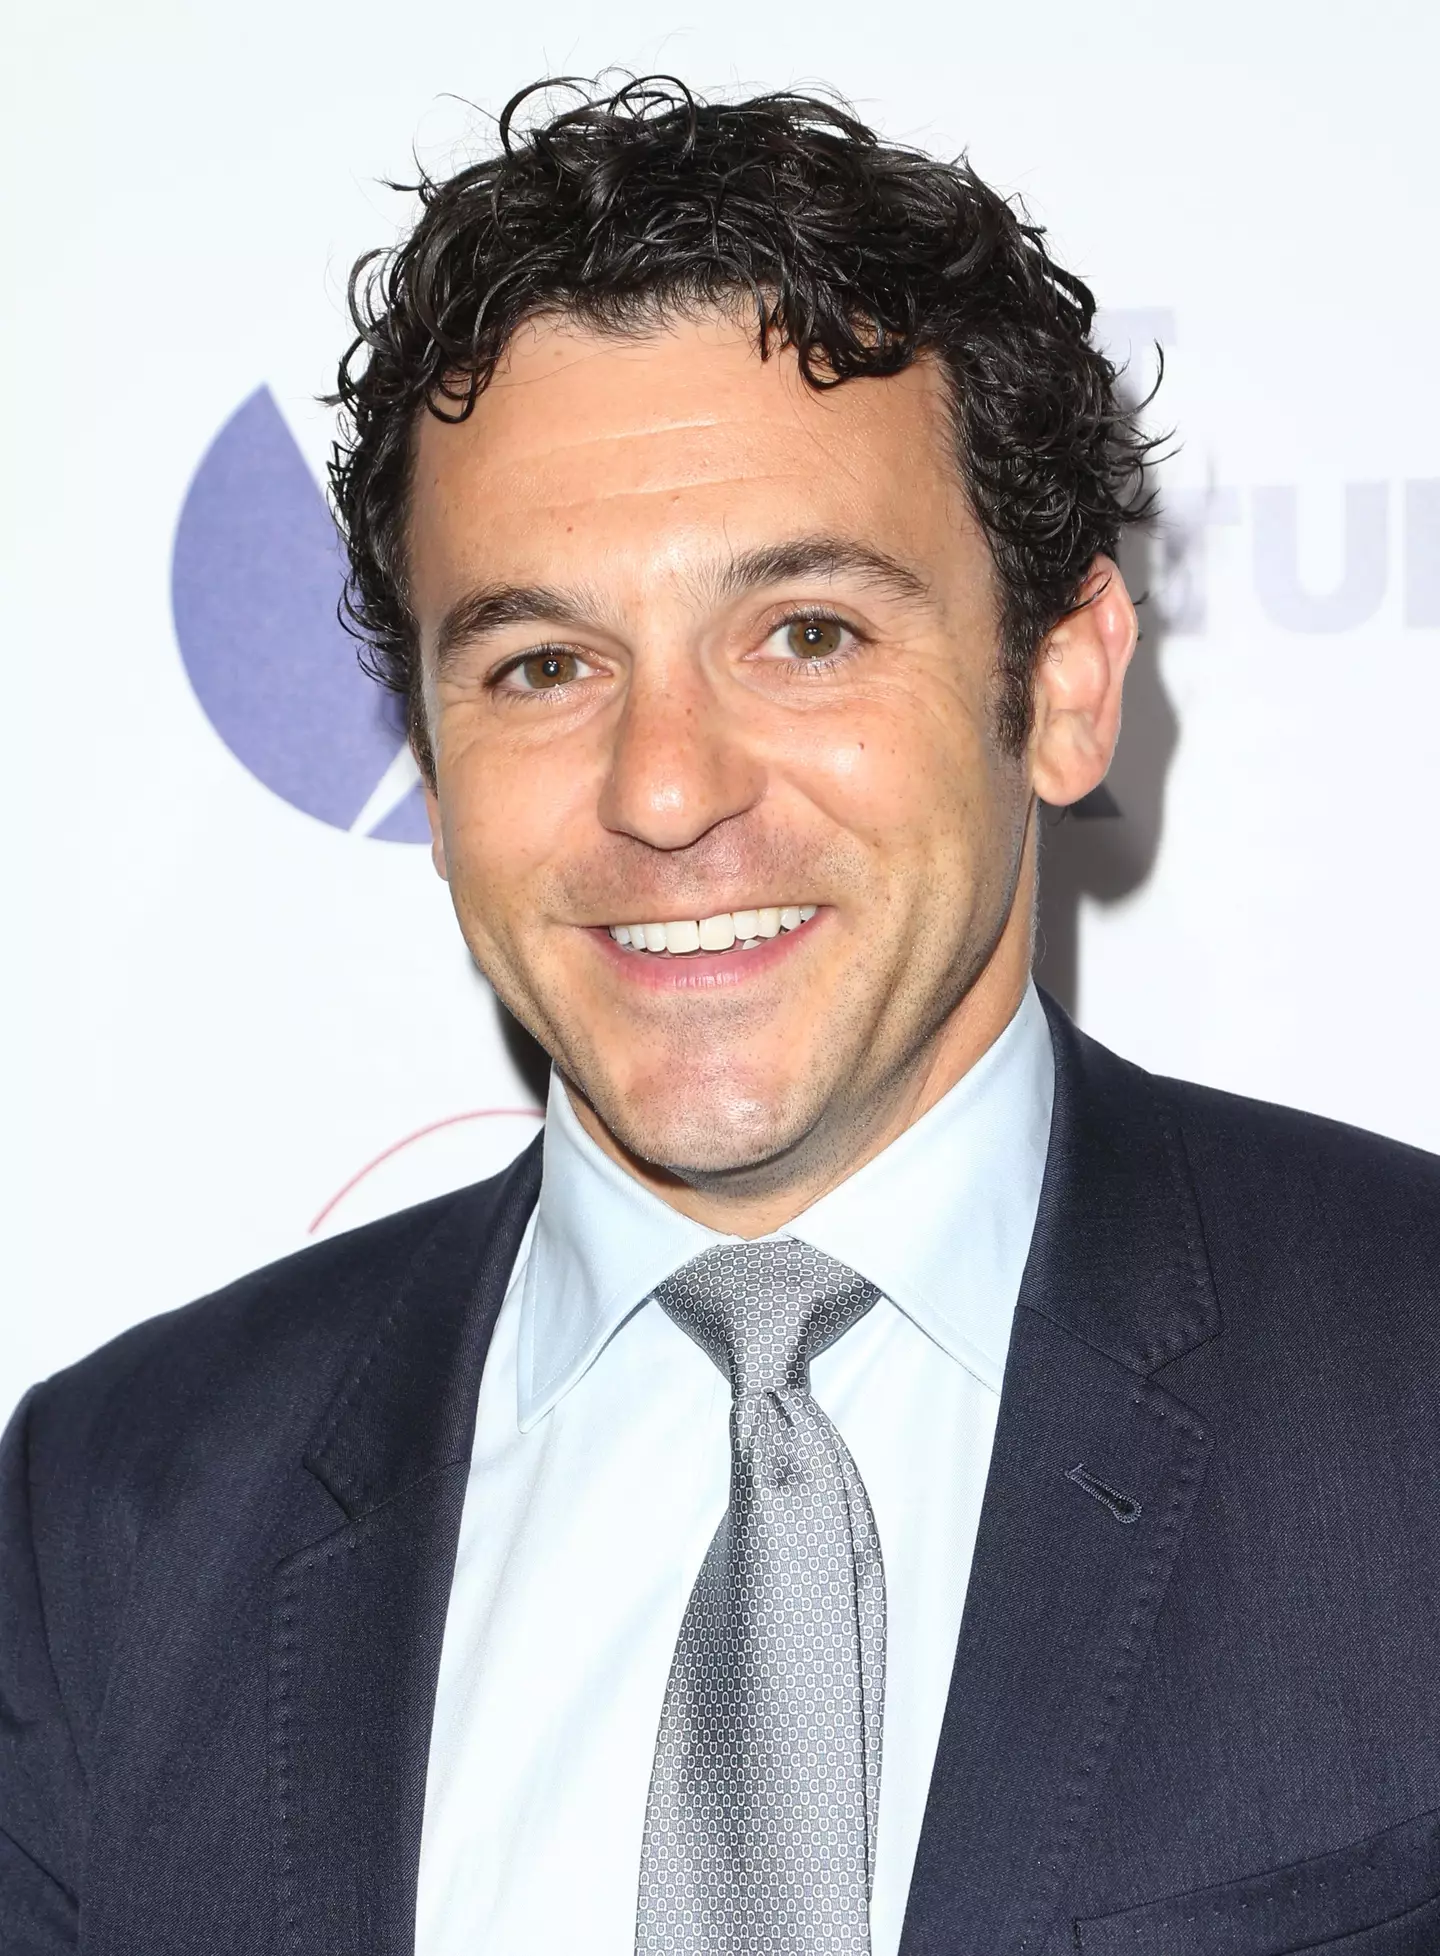 Fred Savage has been booted off The Wonder Years reboot.